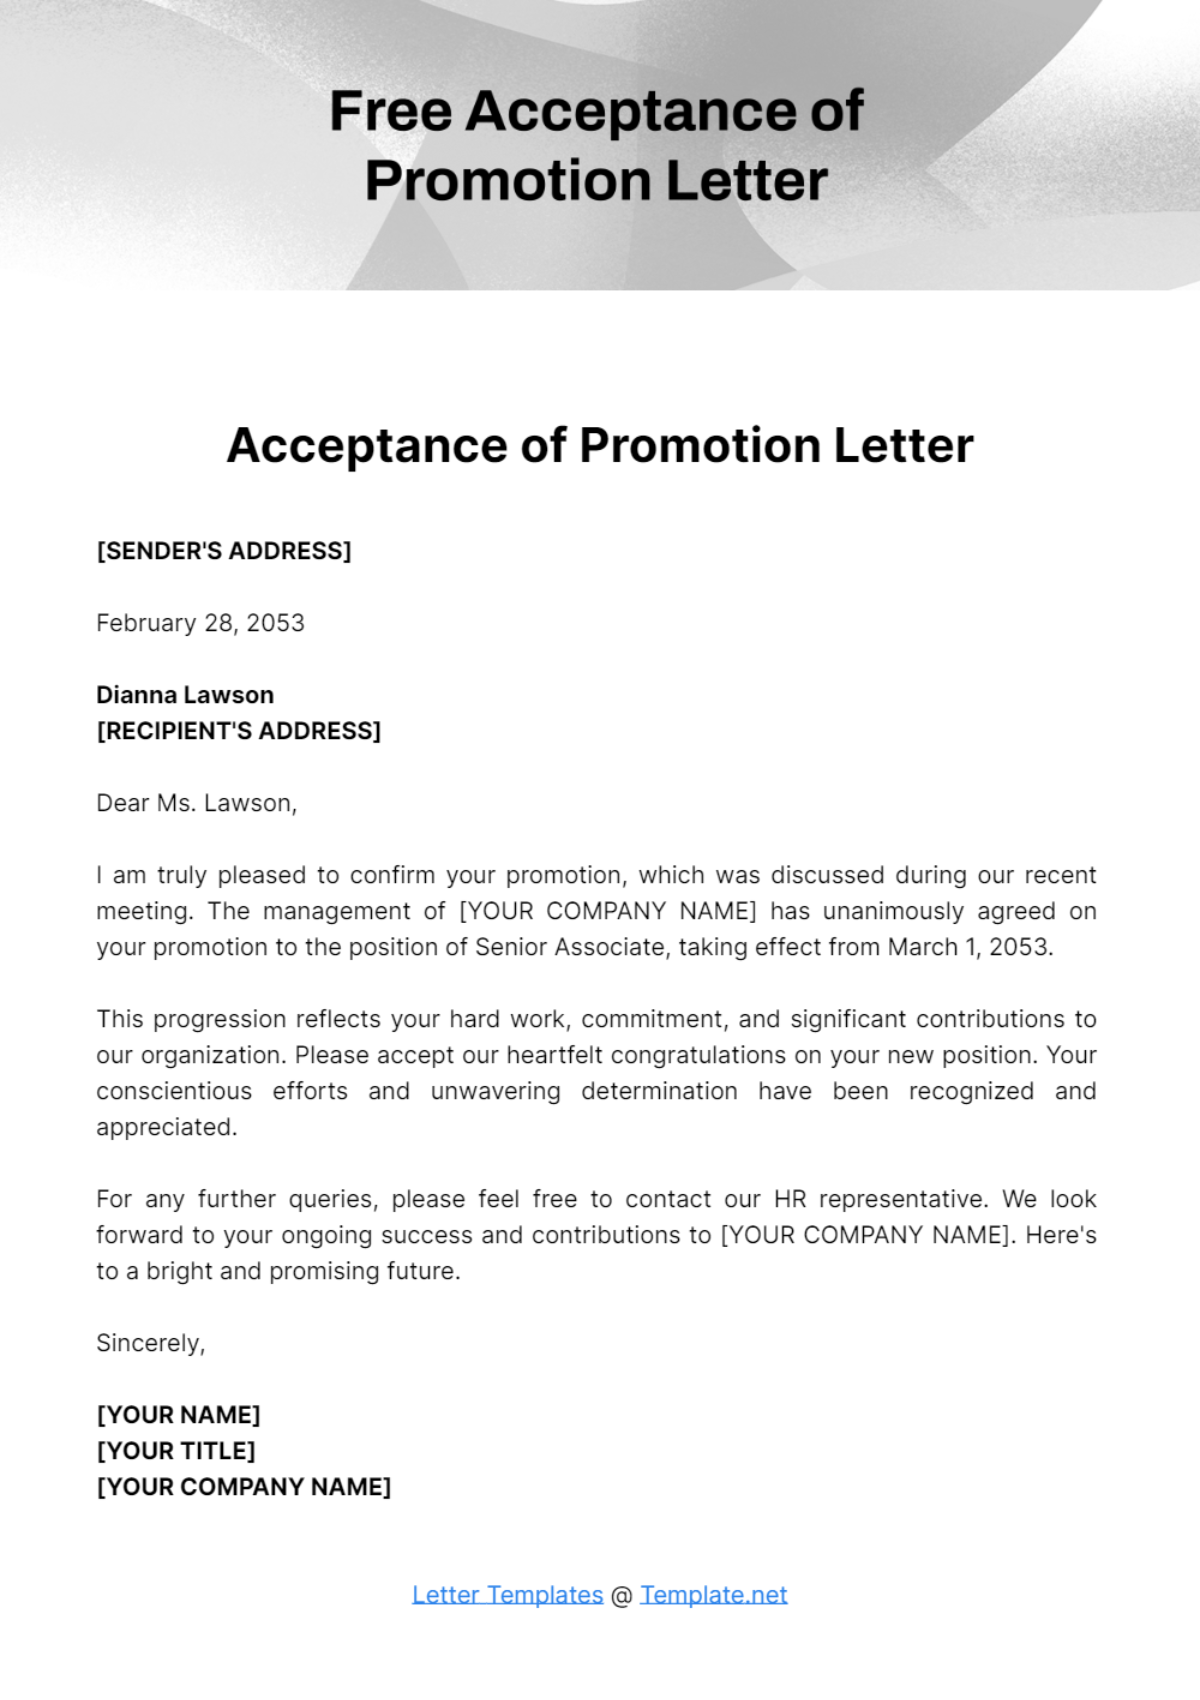 Acceptance of Promotion Letter Template